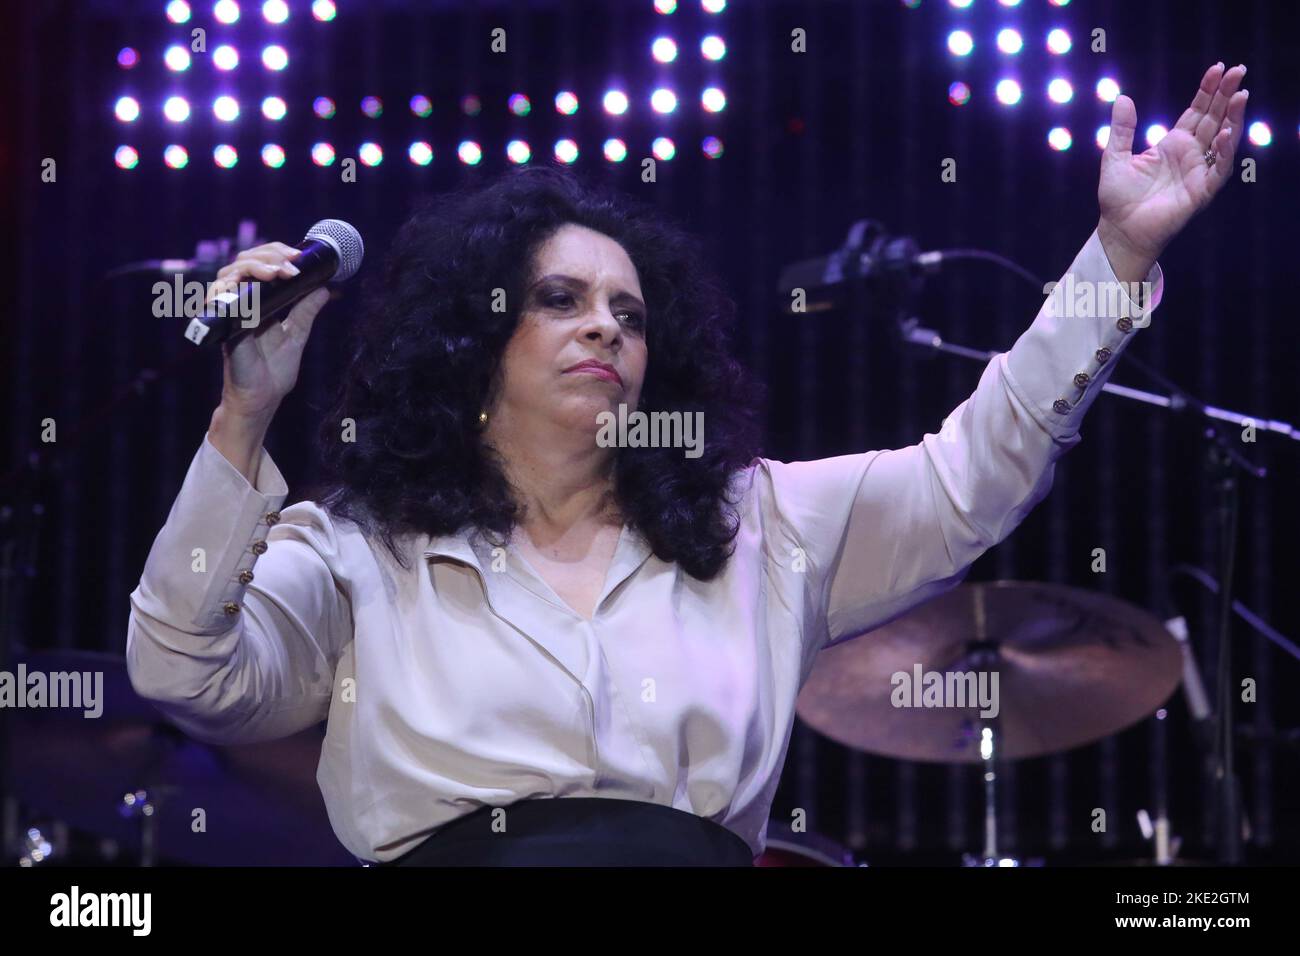 Sao Paulo, Brazil. 30th Nov, 2013. Brazilian singer Gal Costa died at the age of 77. The information was confirmed by the singer's advice on Wednesday (9). She had taken a break from concerts after undergoing surgery to remove a lump in her nasal cavity. Archive of 11/30/2013 - during the show with Hologram by singer Cazuza during tribute in his honor, held at Parque da Juventude, north of São Paulo. (Photo: Vanessa Carvalho/Brazil Photo Press) Credit: Brazil Photo Press/Alamy Live News Stock Photo